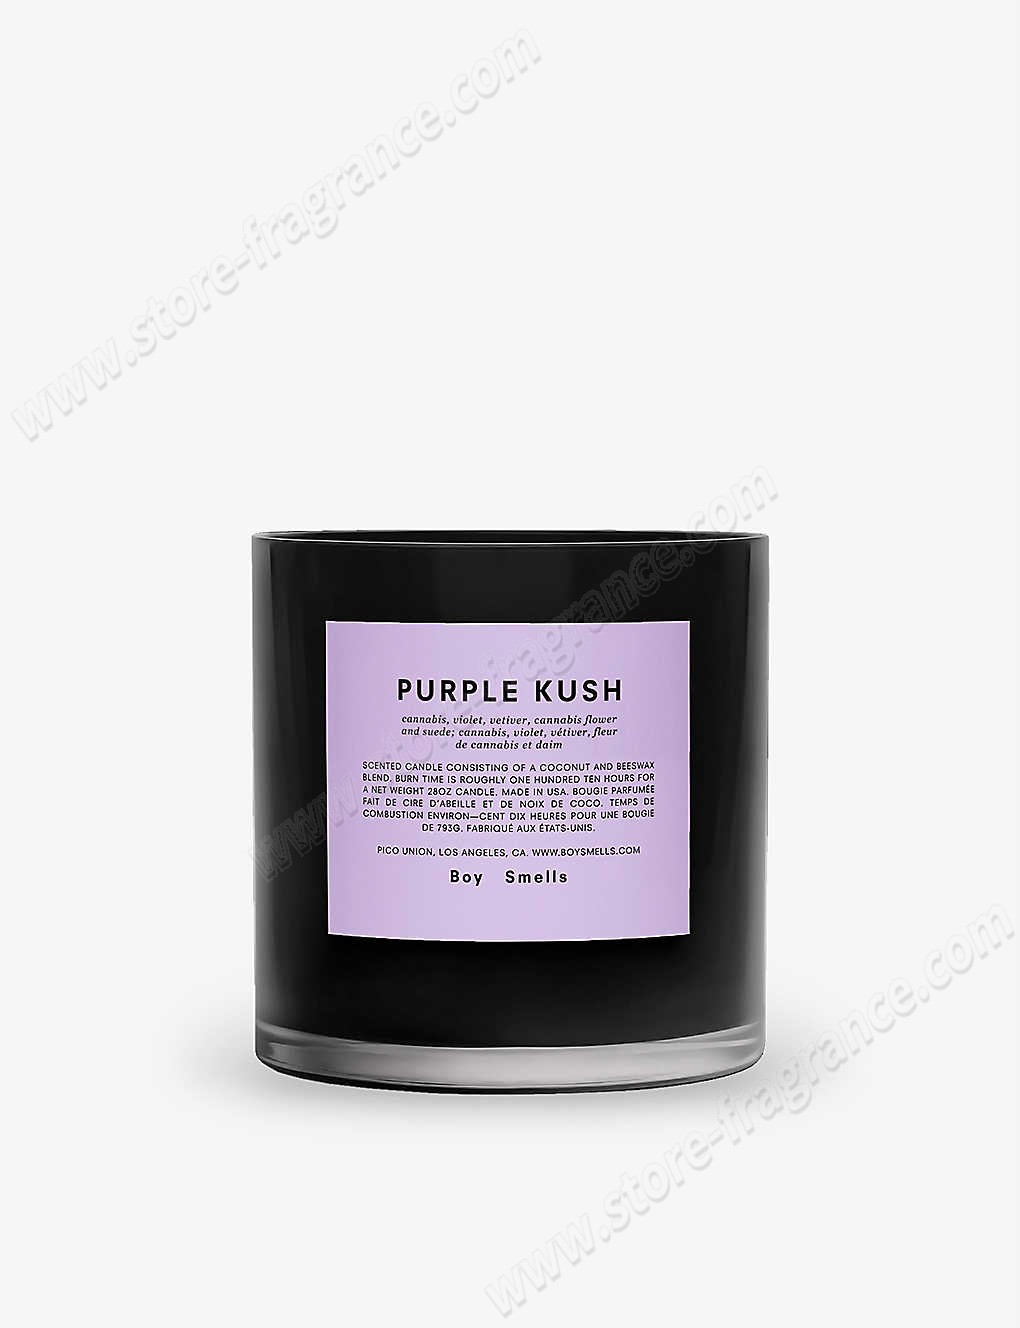 BOY SMELLS/Purple Kush scented candle 765g ✿ Discount Store - BOY SMELLS/Purple Kush scented candle 765g ✿ Discount Store